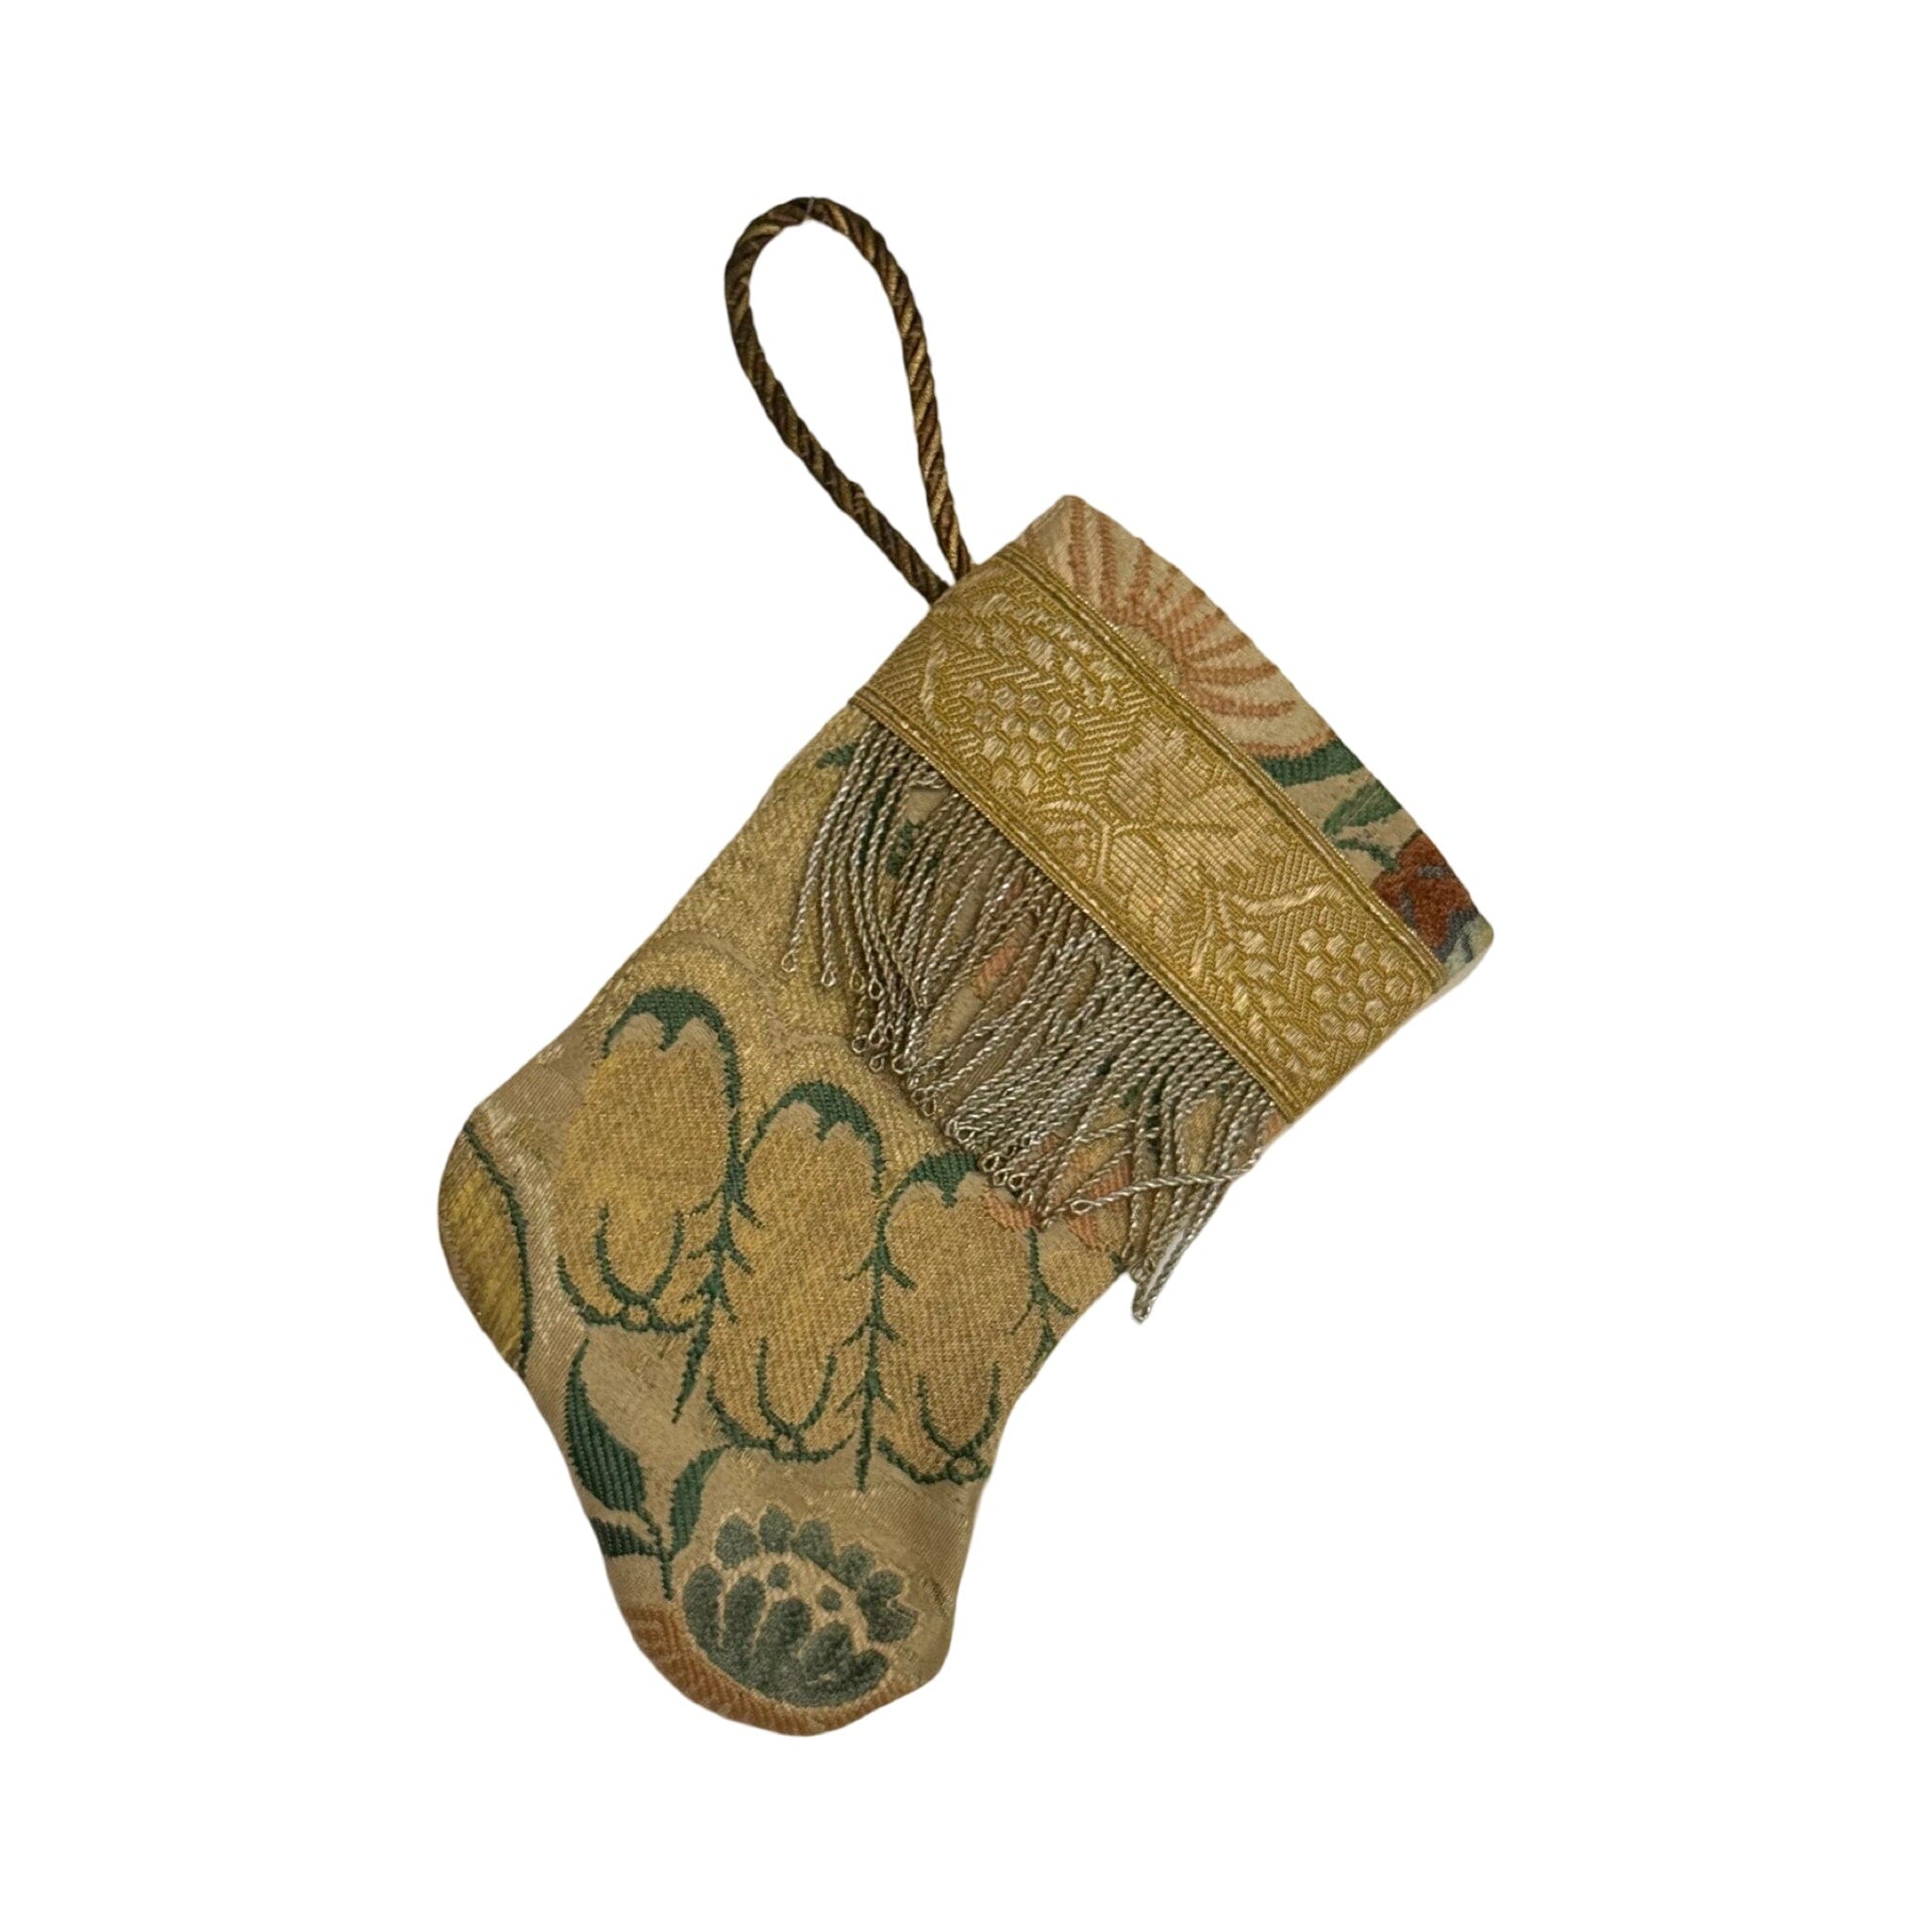 Handmade Mini Stocking Made From Vintage Fabric and Trims- Green and Gold Ornament B. Viz Design J 